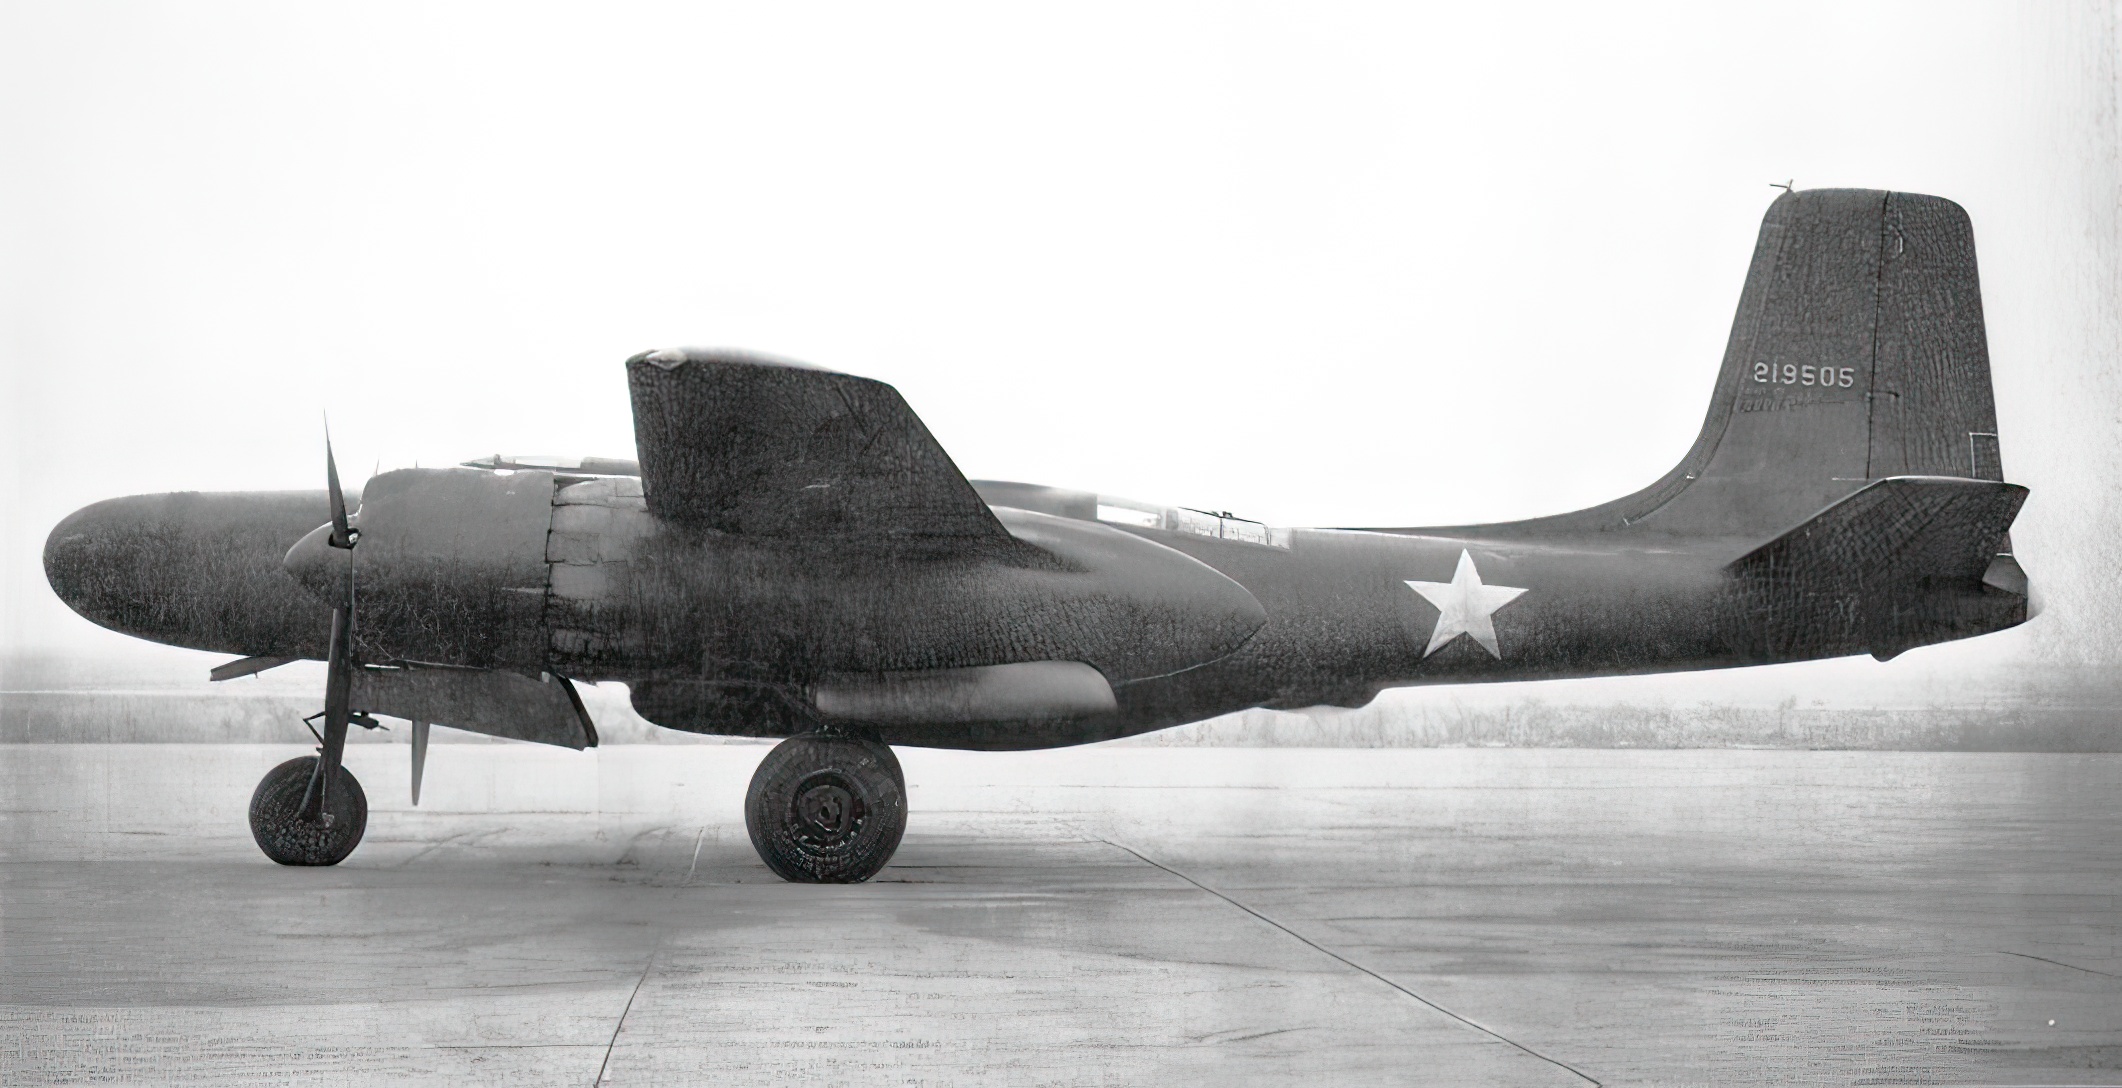 Prototype of proposed night fighter version of A-26